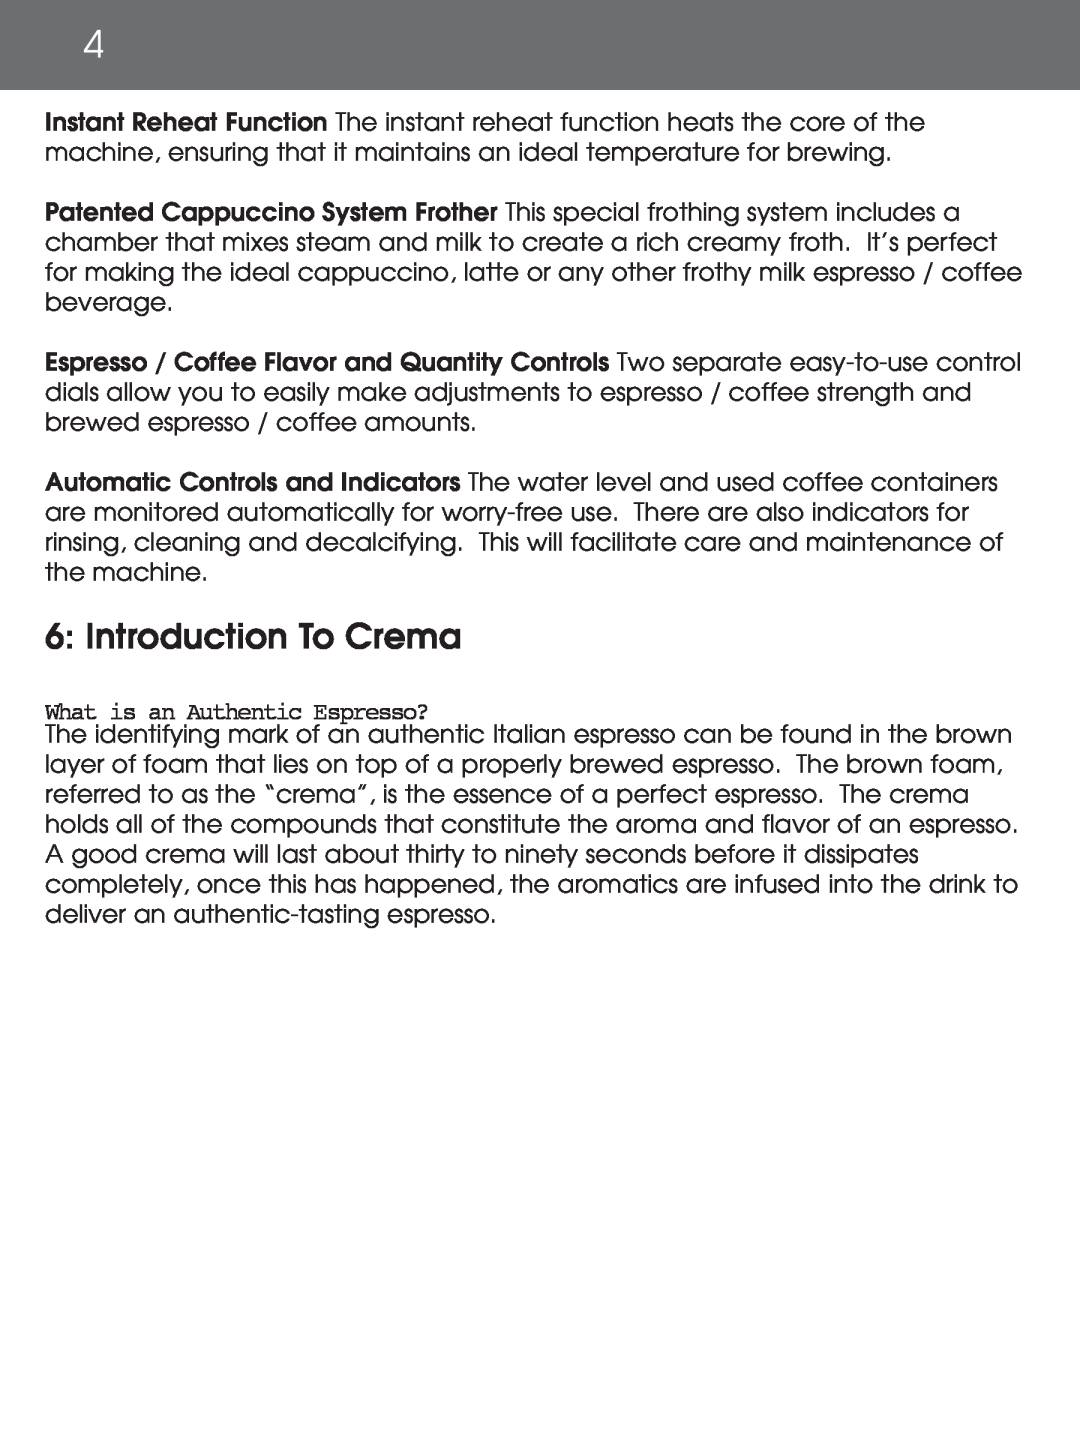 DeLonghi EAM4000 instruction manual 6: Introduction To Crema, What is an Authentic Espresso? 